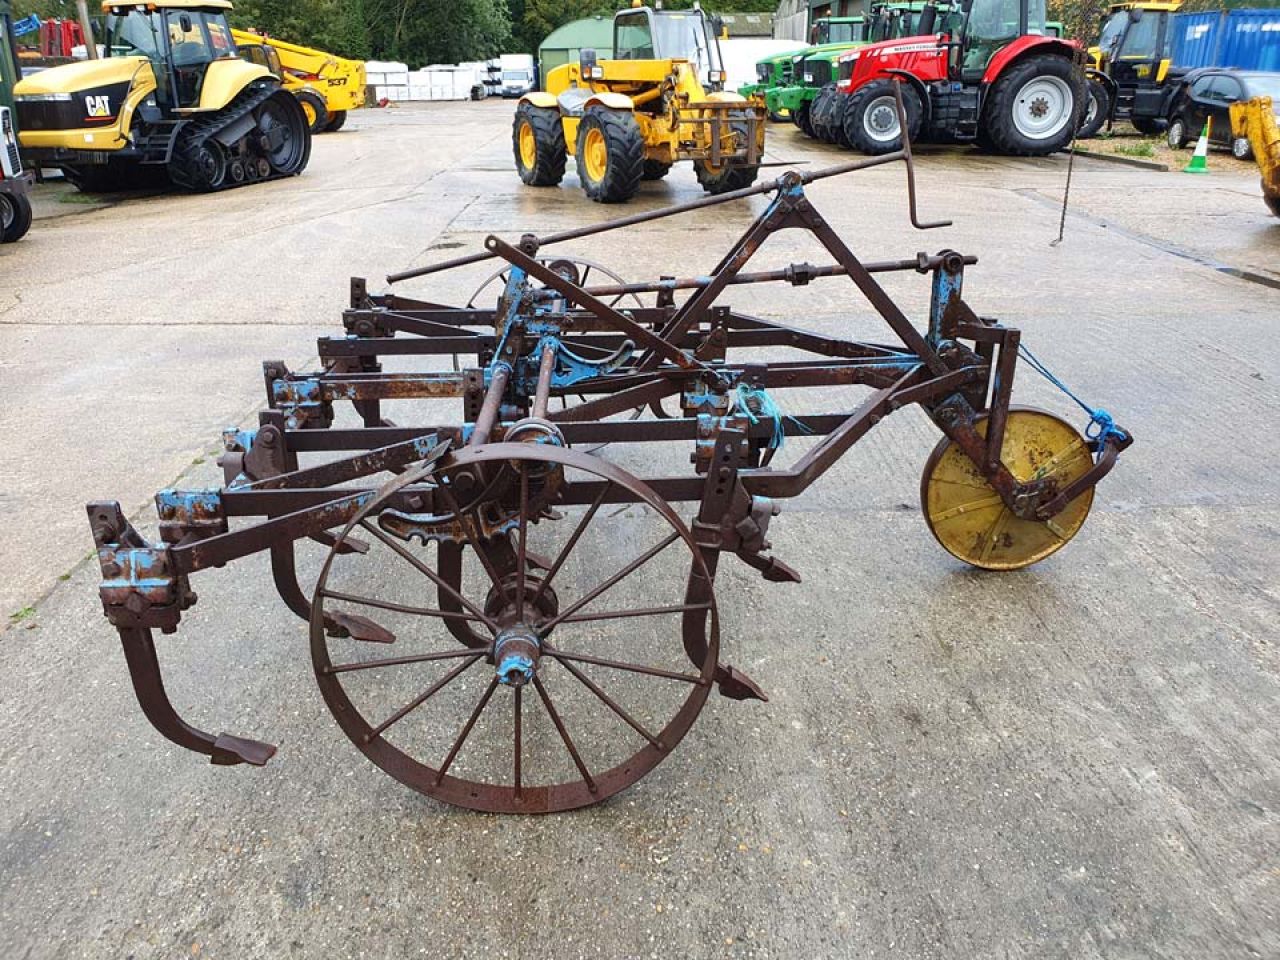 RANSOMES 13 TYNE TRAILED CULTIVATOR